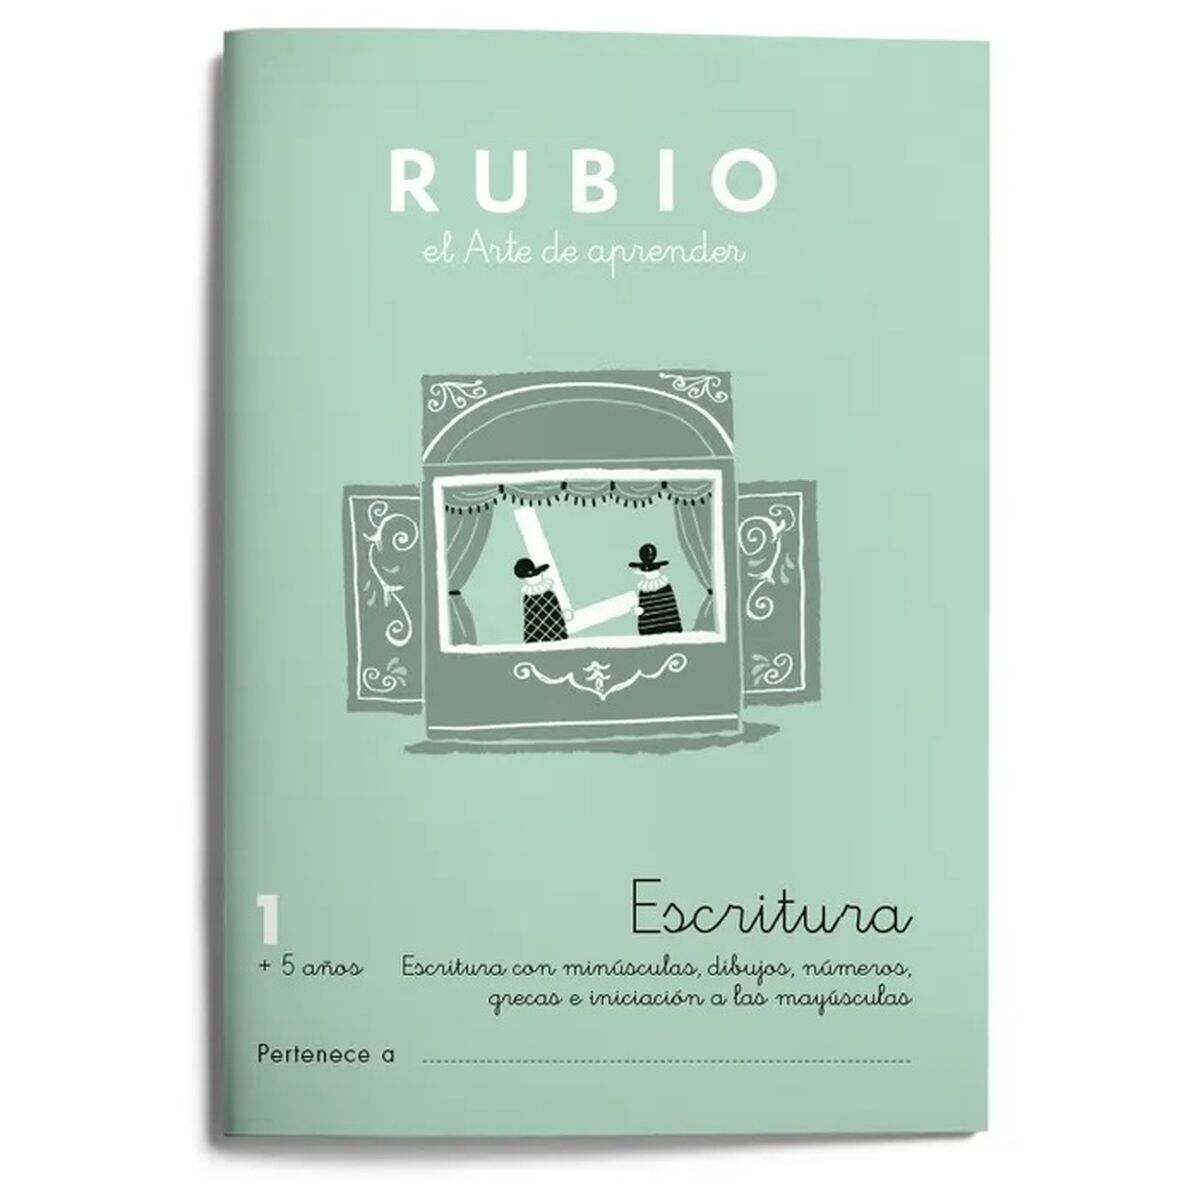 Writing and calligraphy notebook Rubio Nº1 A5 Spanish 20 Sheets (10 Units)